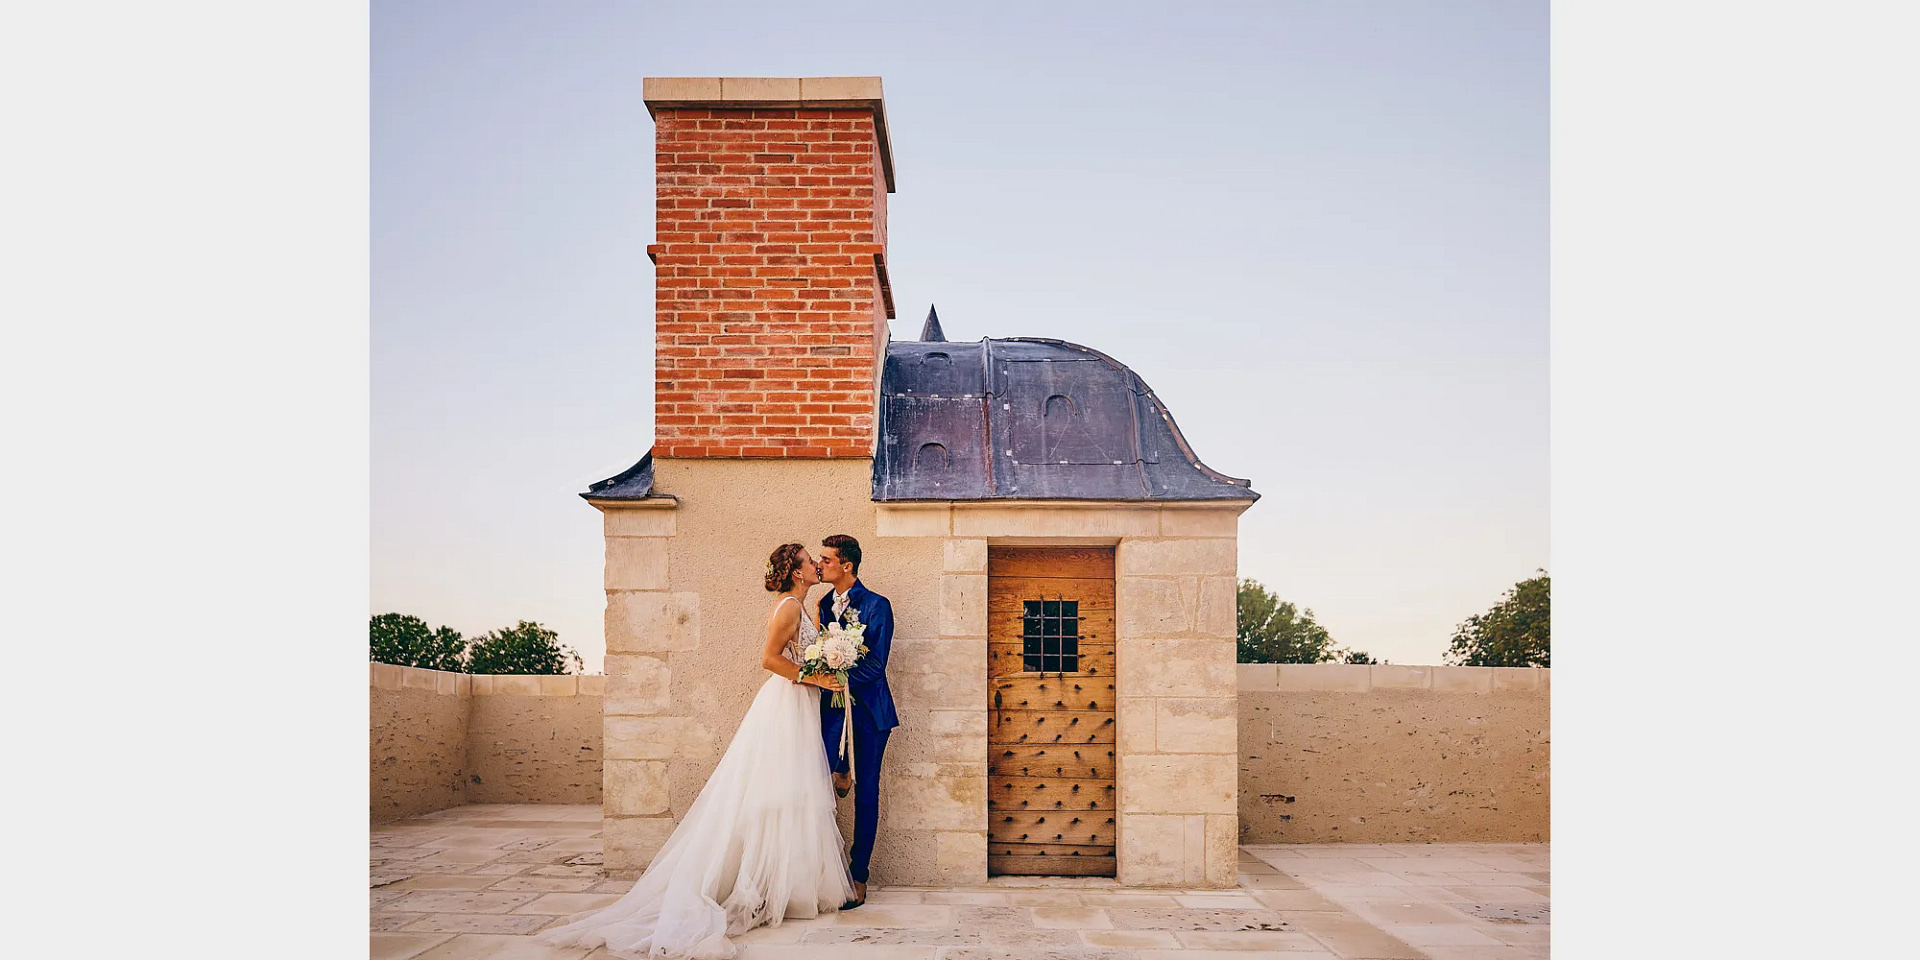 wedding chateaus affordable france